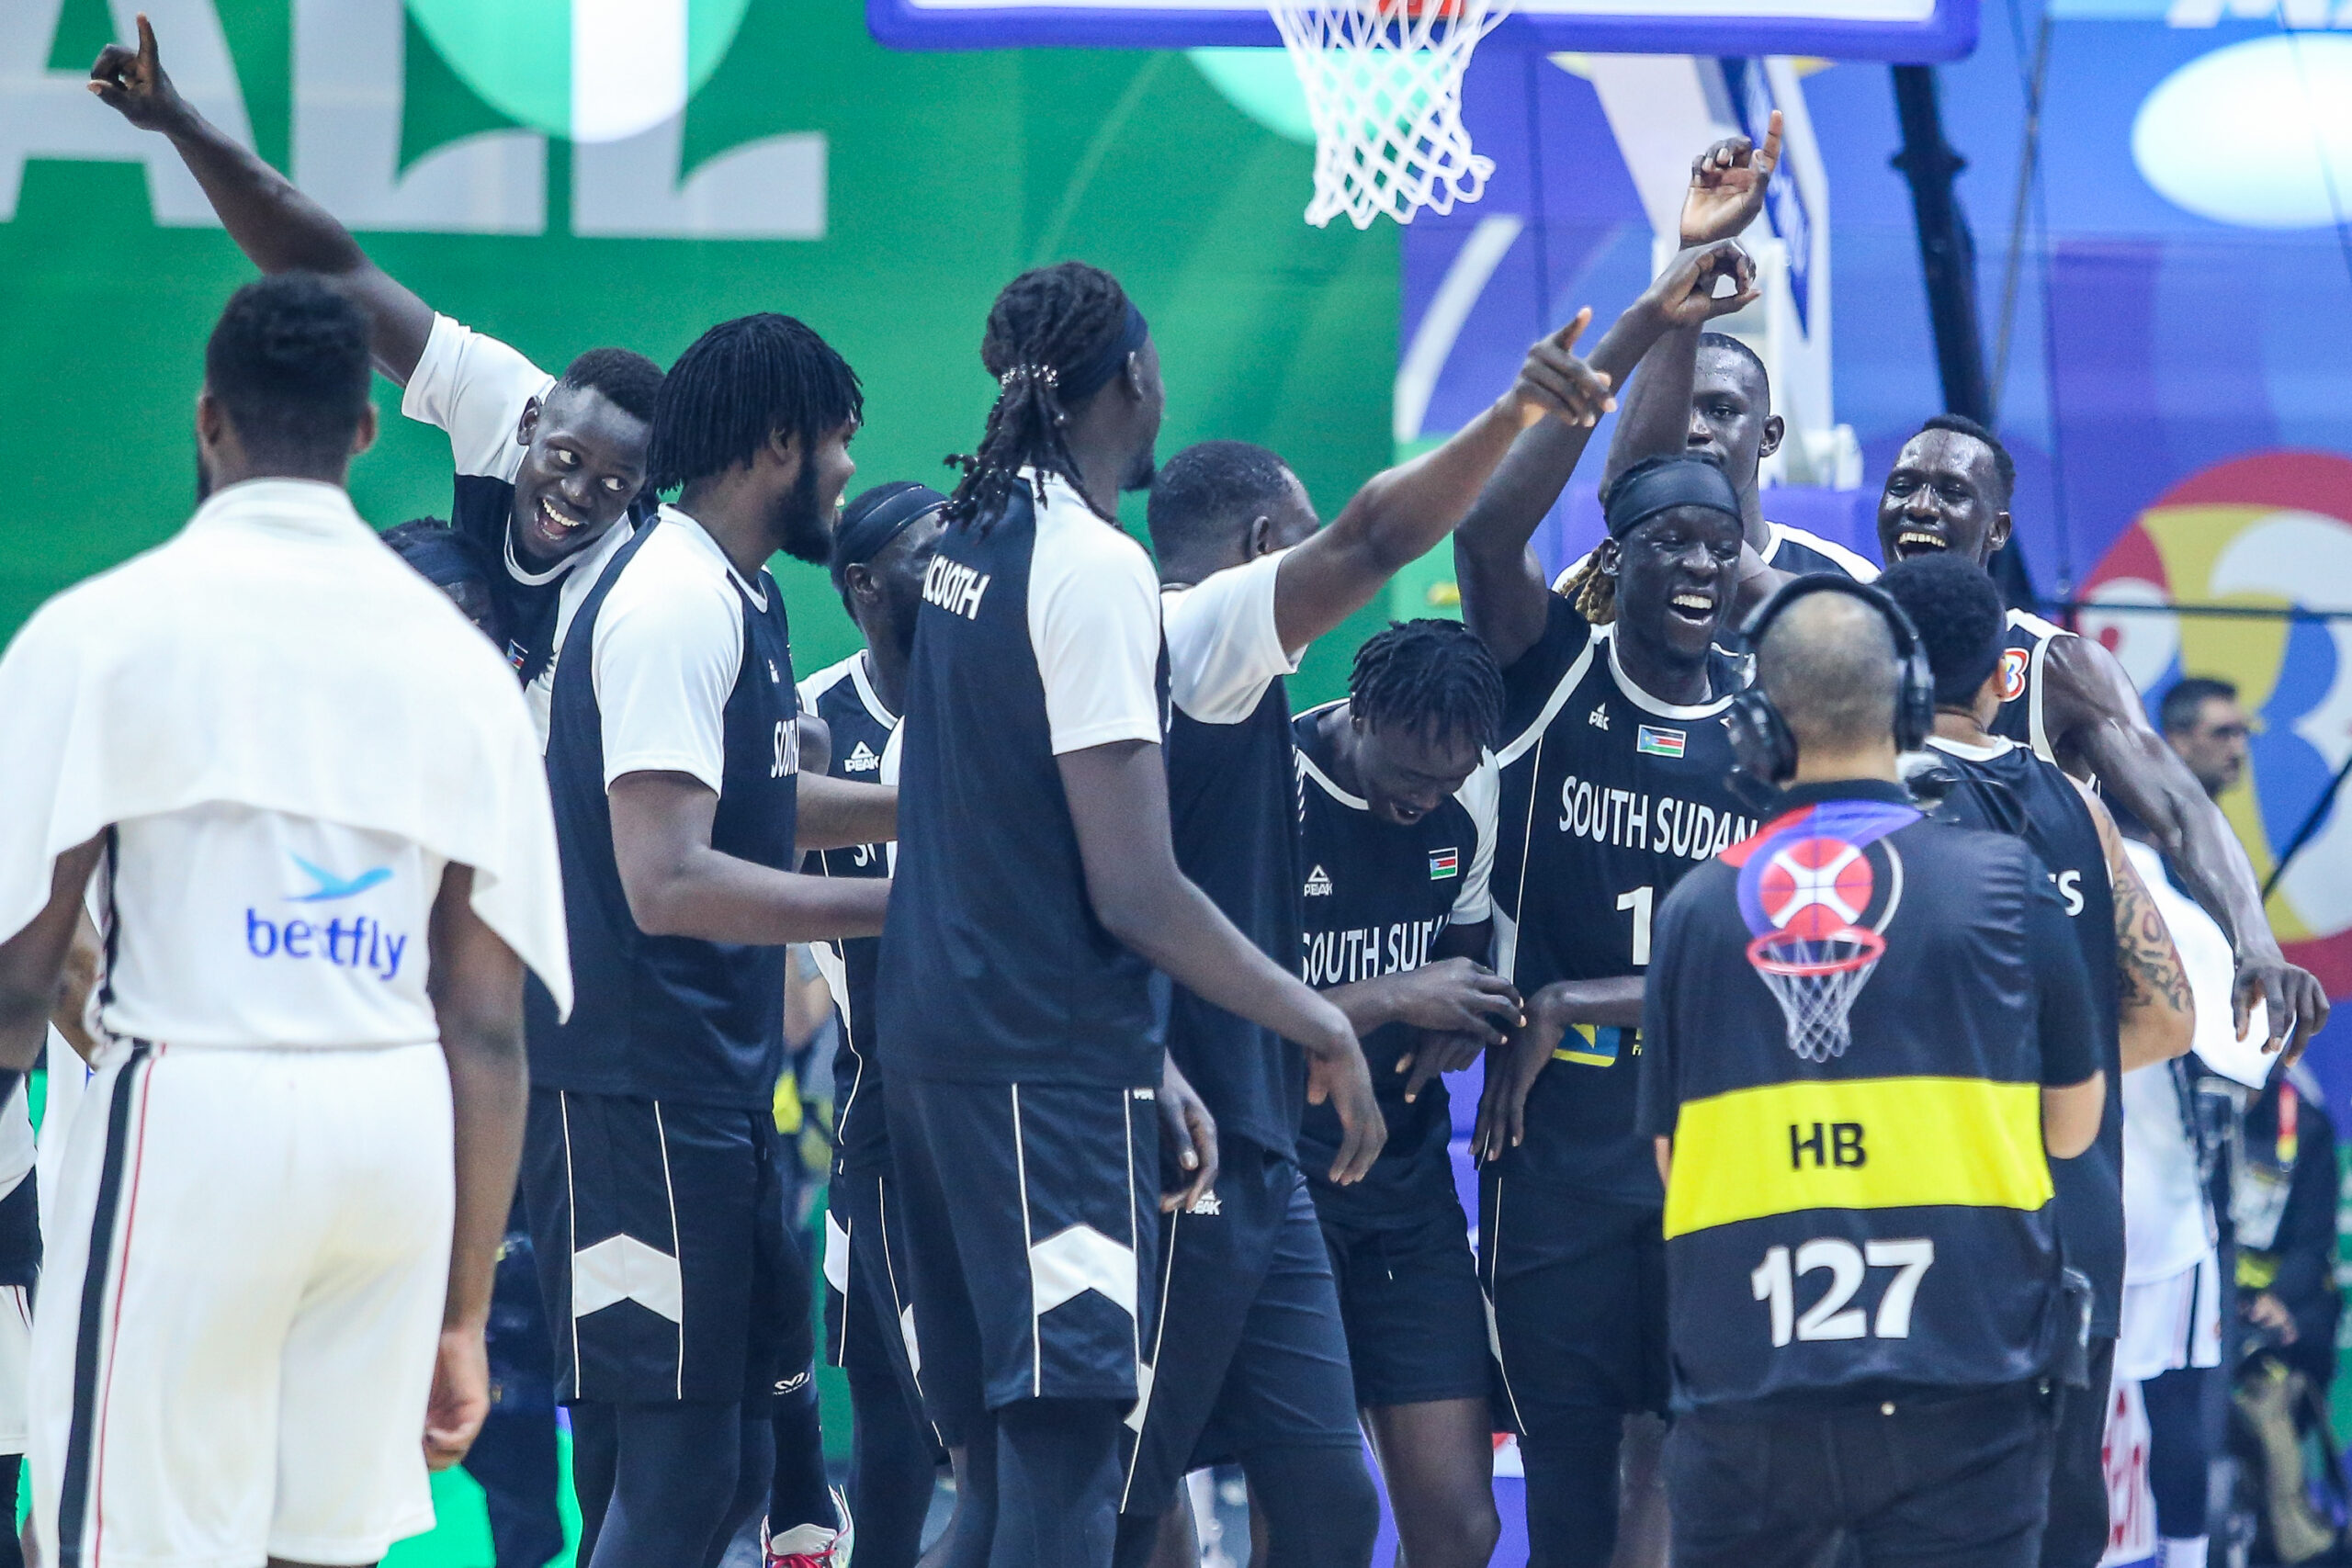 South Sudan ends historic Fiba World Cup campaign with an Olympics berth.